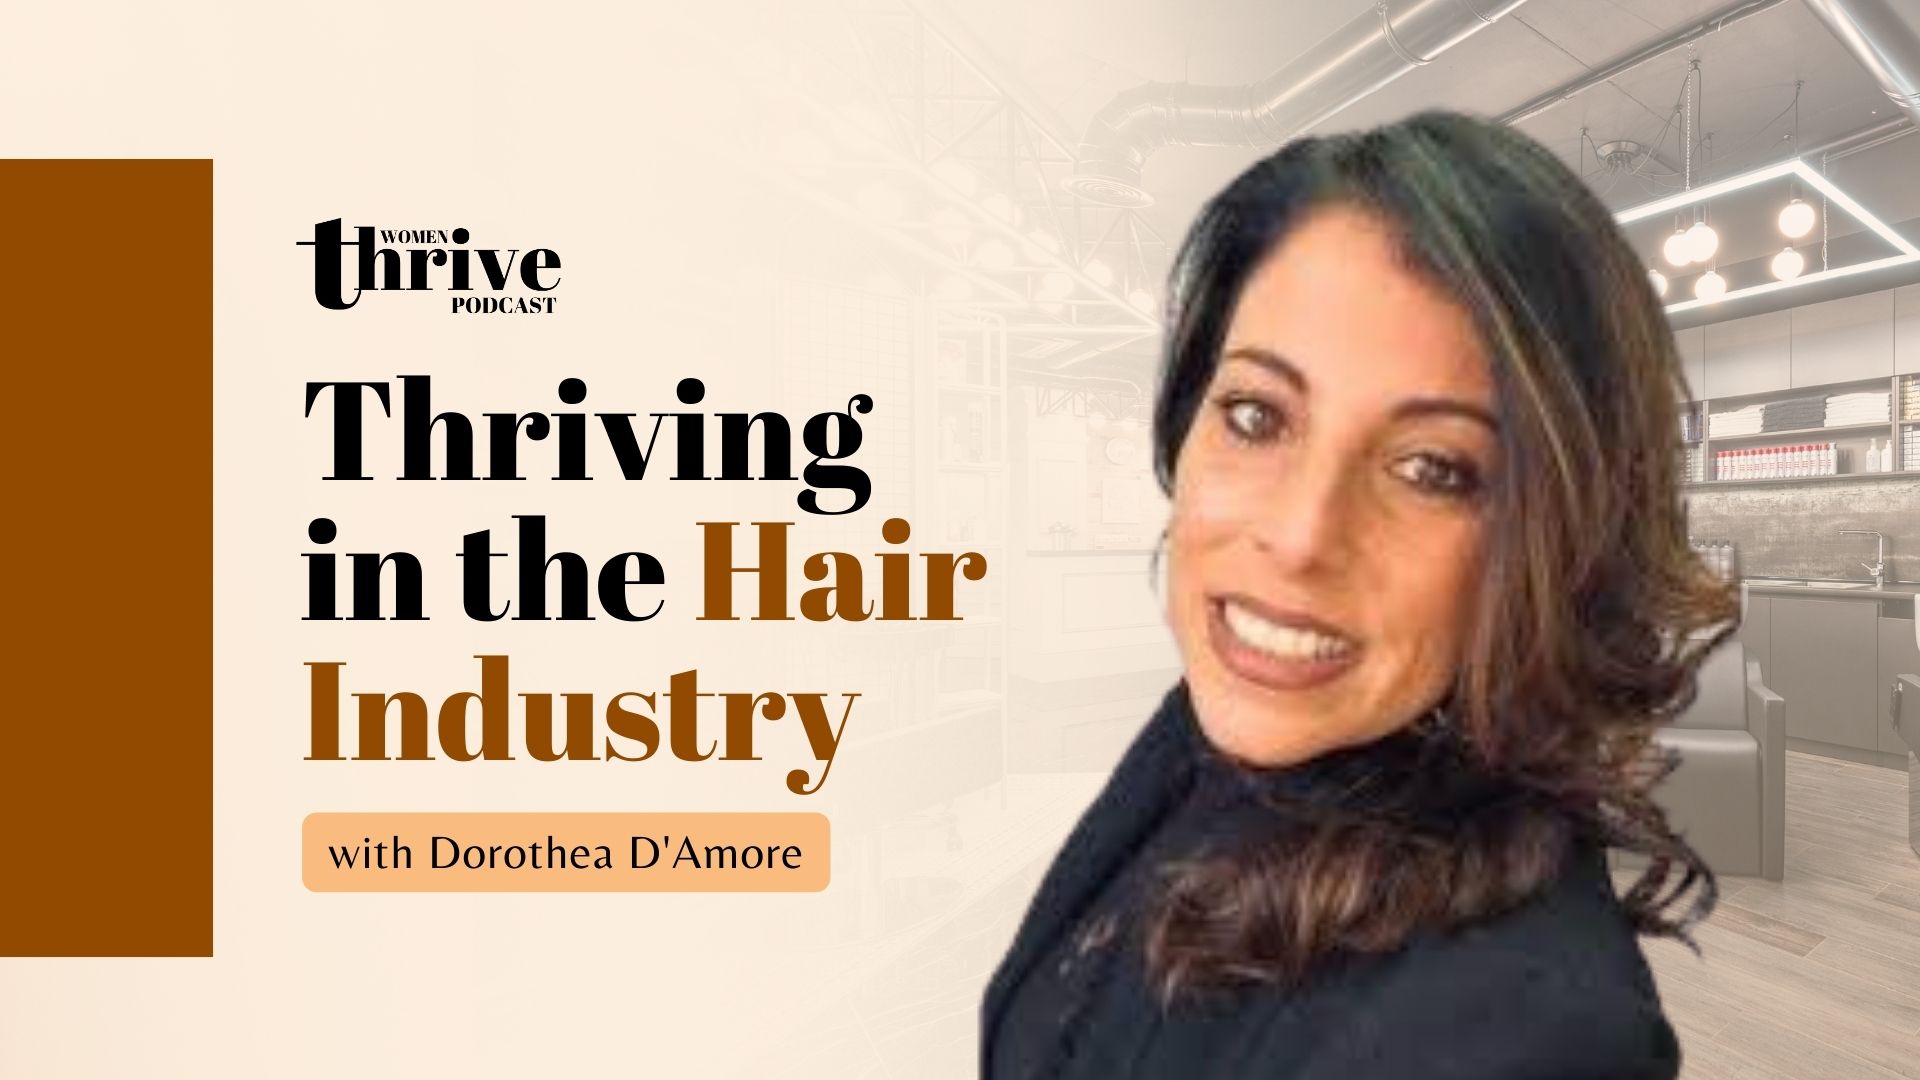 Thriving in the Hair Industry with Dorothea D'Amore